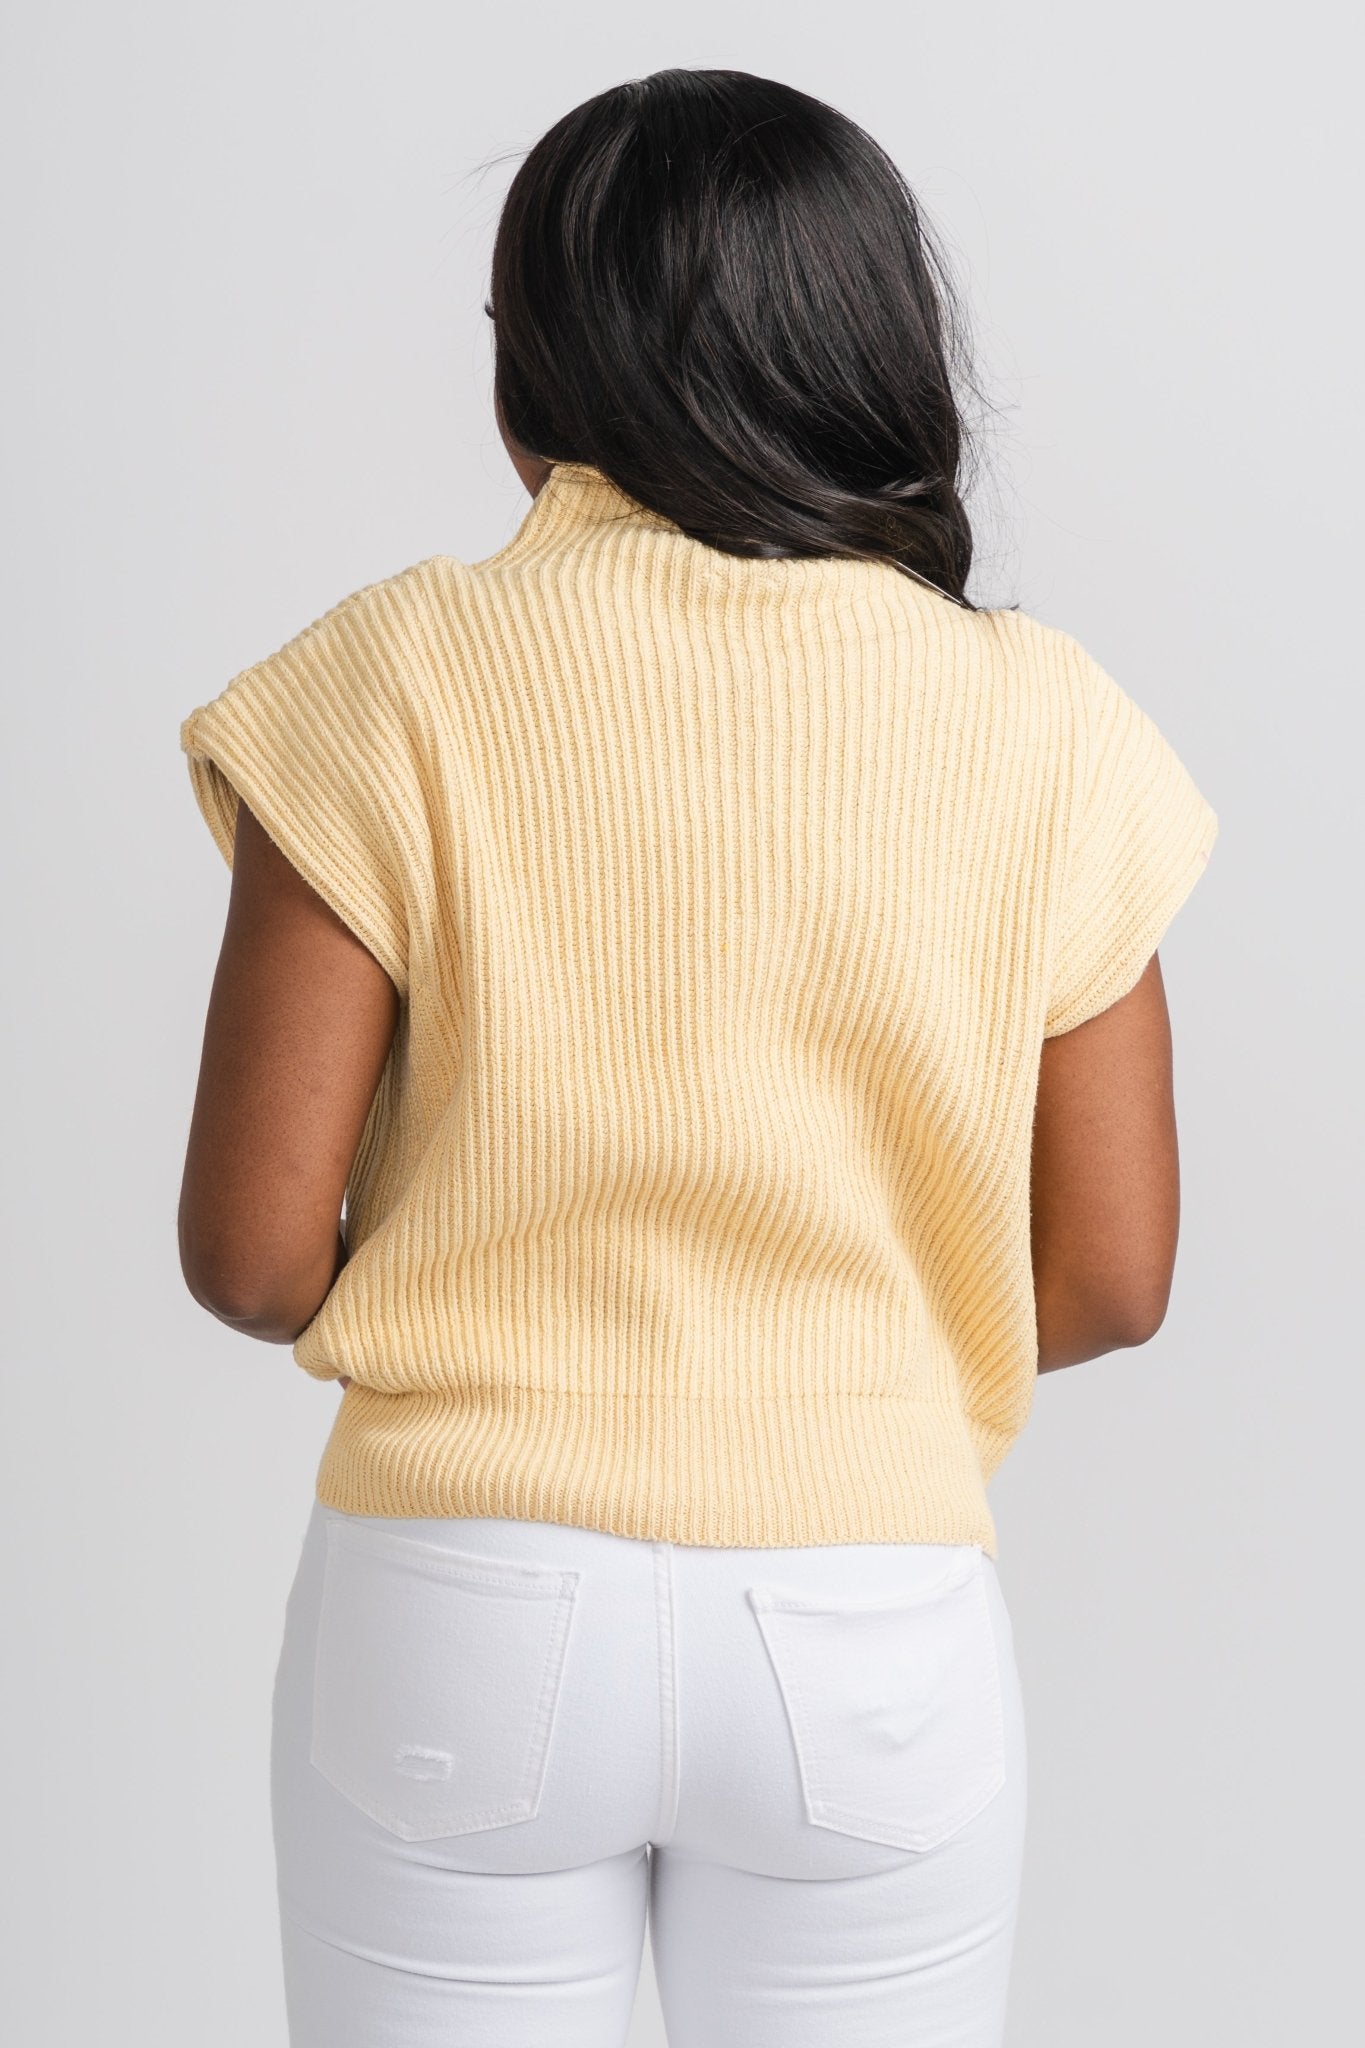 Turtle neck sweater vest top yellow - Trendy sweater vest - Fun Easter Looks at Lush Fashion Lounge Boutique in Oklahoma